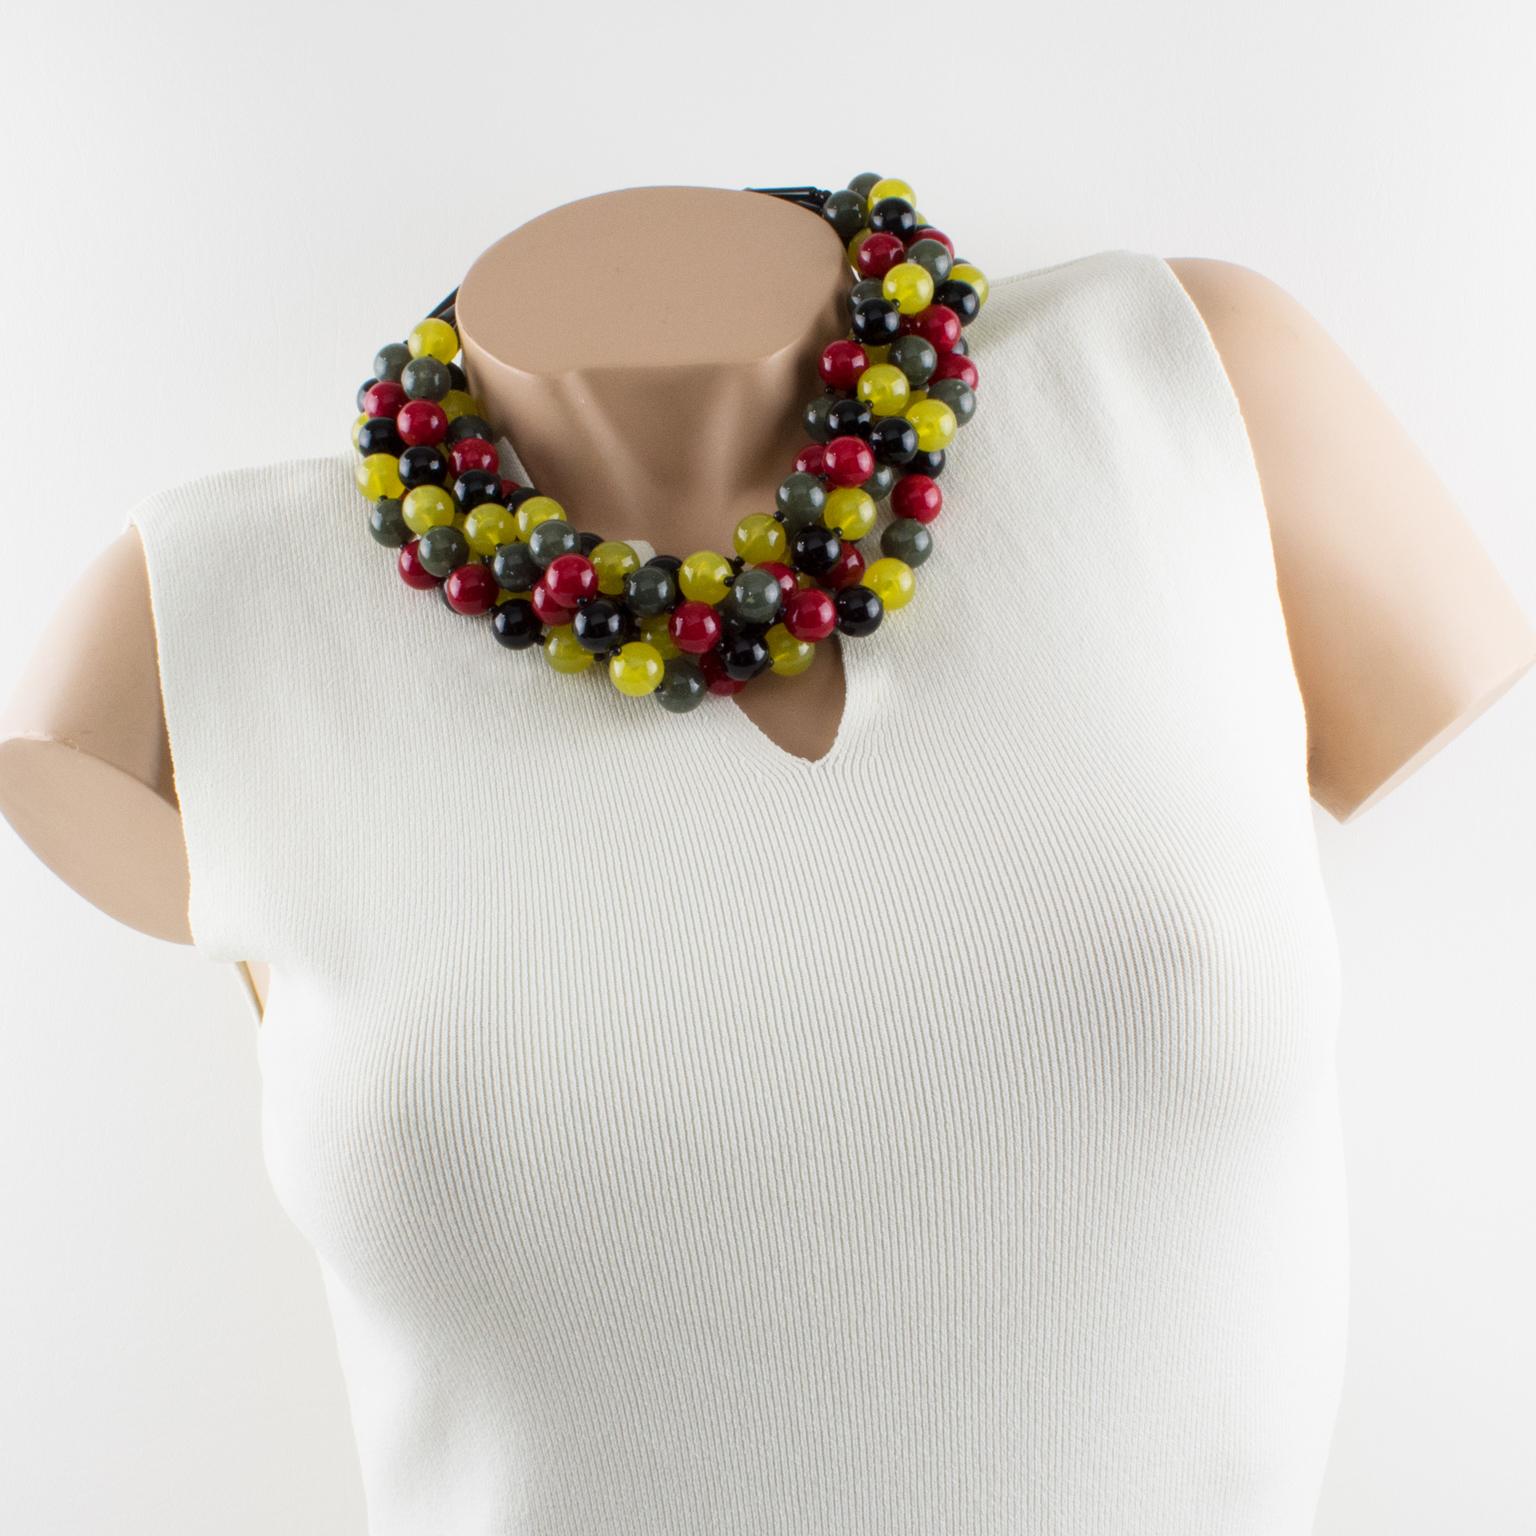 Charming Angela Caputi, made in Italy resin choker beaded necklace. Oversized fruit salad multi-strand design with grape seed size beads in burgundy red, black, blonde yellow, and sage green colors. Her matching of colors is always extremely classy,